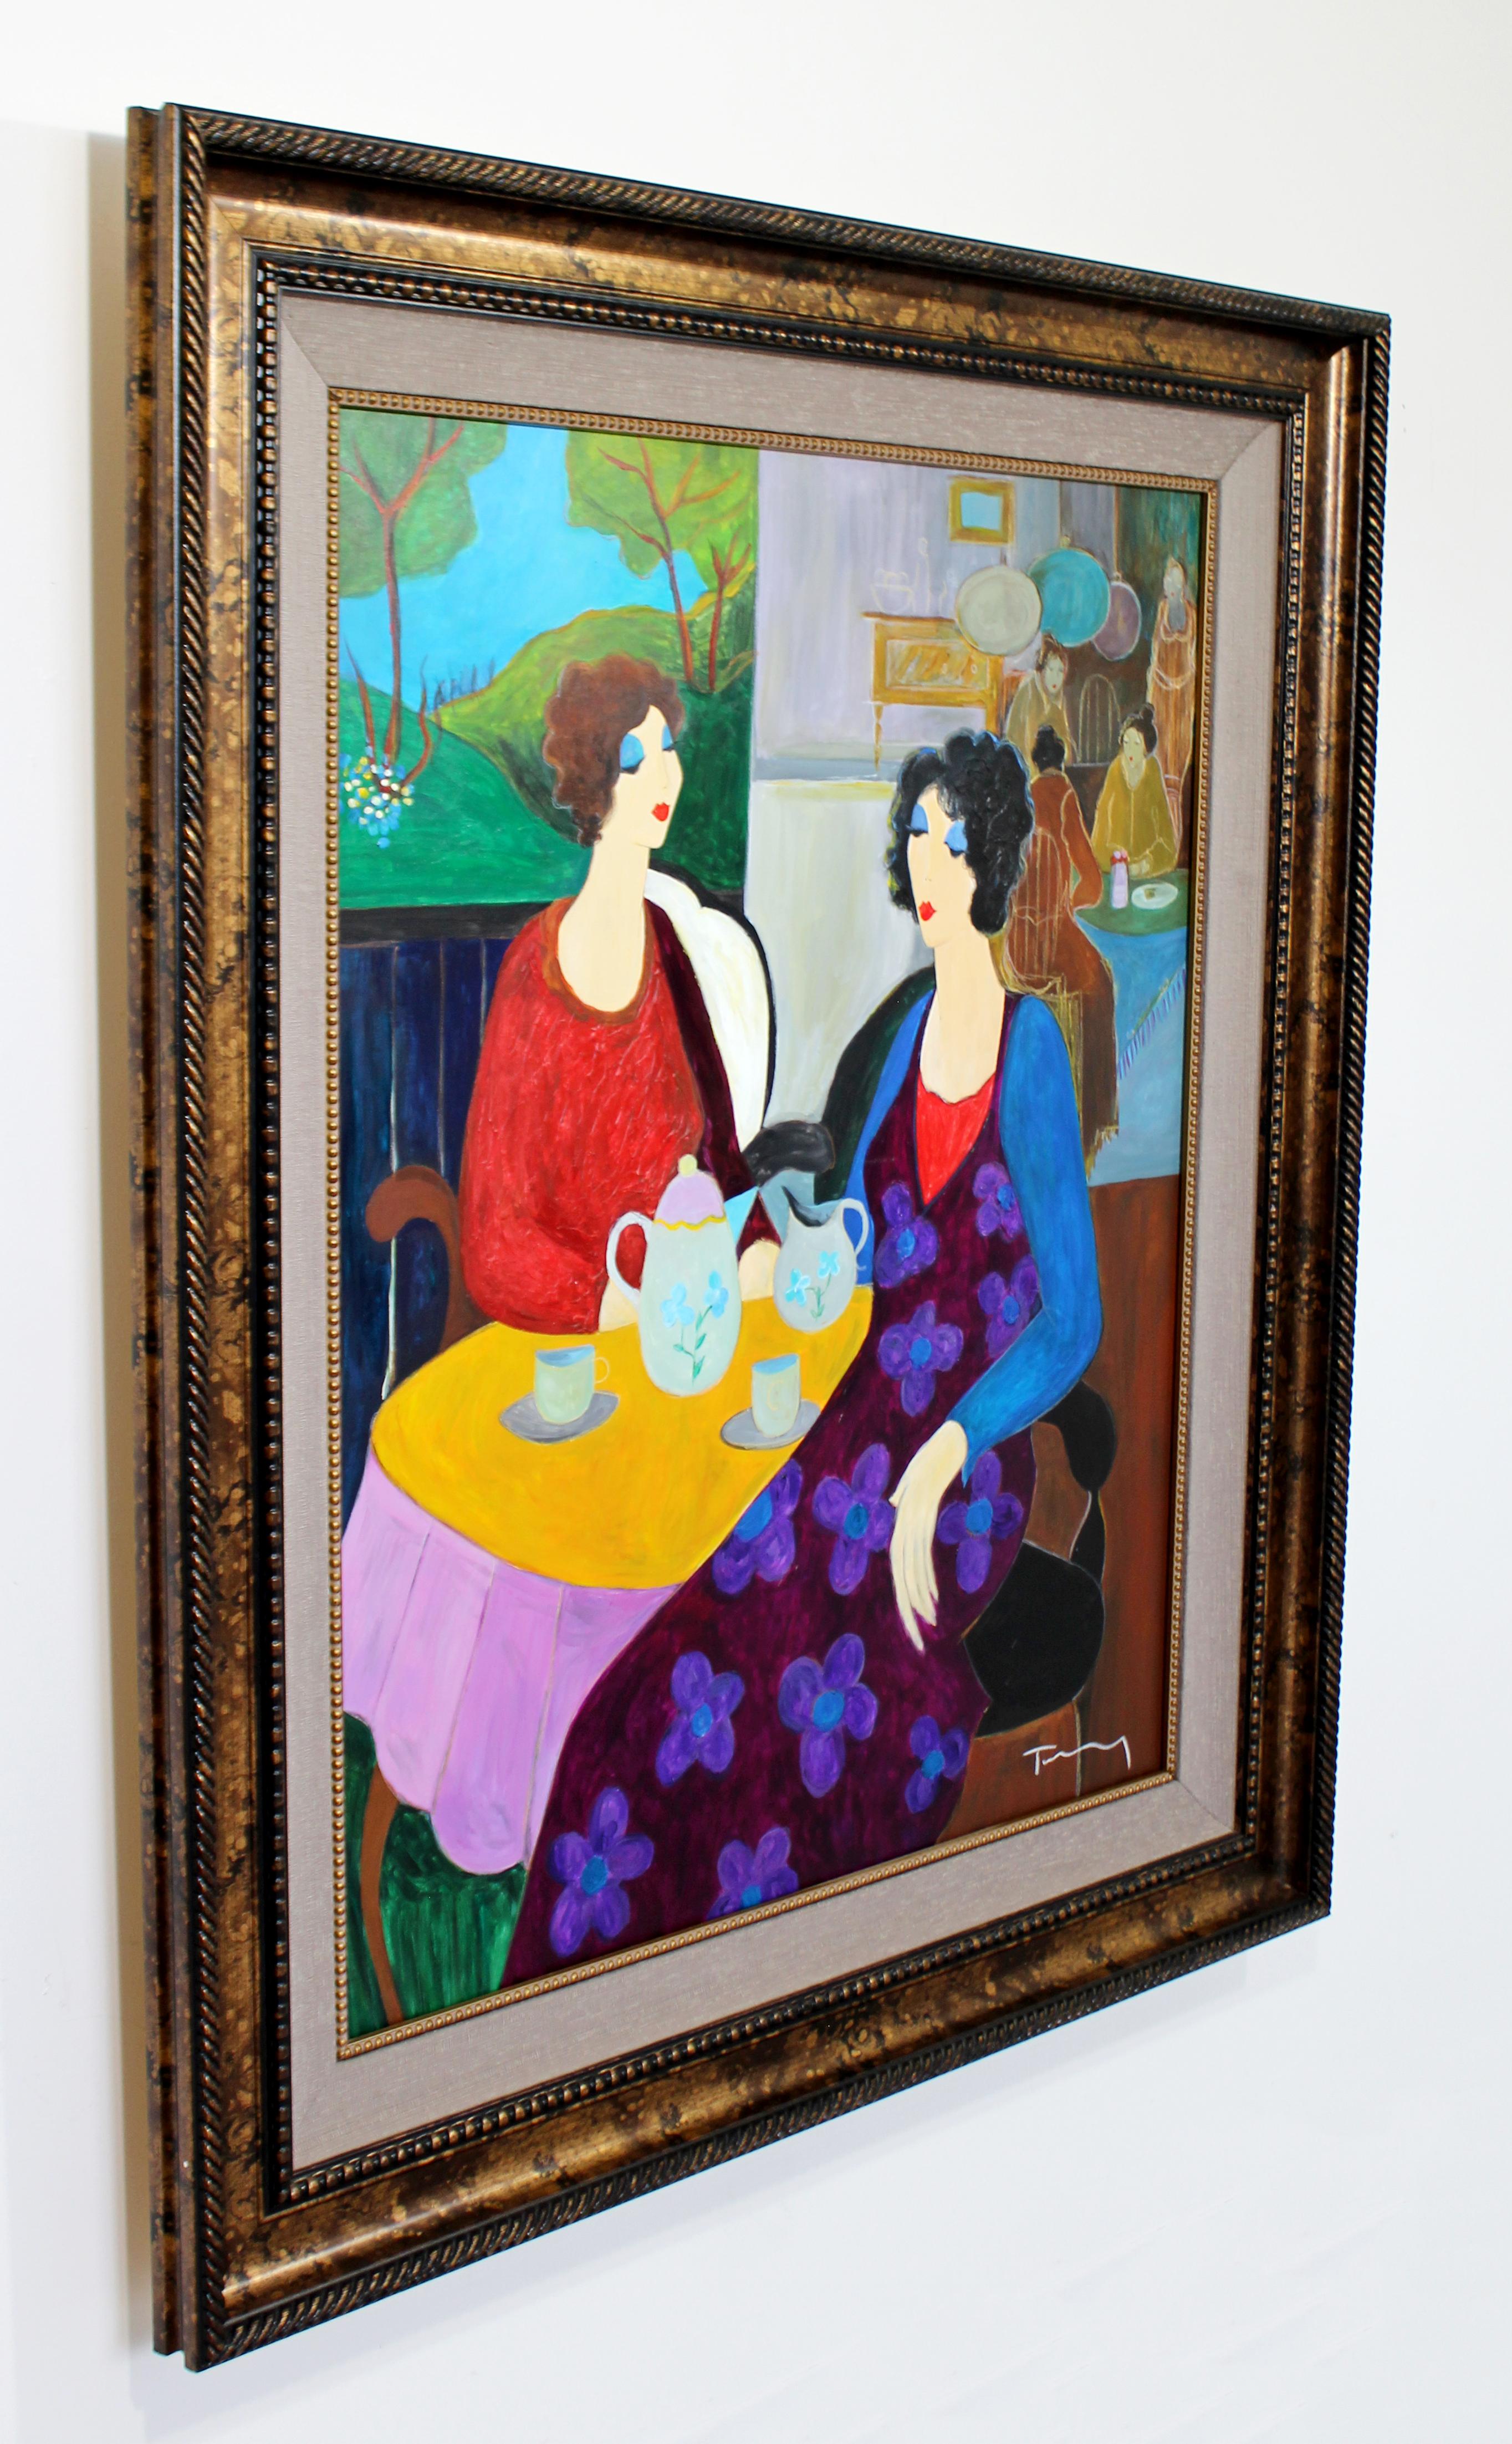 For your consideration is a fabulous, large unique acrylic on canvas painting, signed by artist in black frame with gold rope.  Itzchak Tarkay is considered to be a key figure in the modern figurative movement.  Artwork by the Israeli artist are